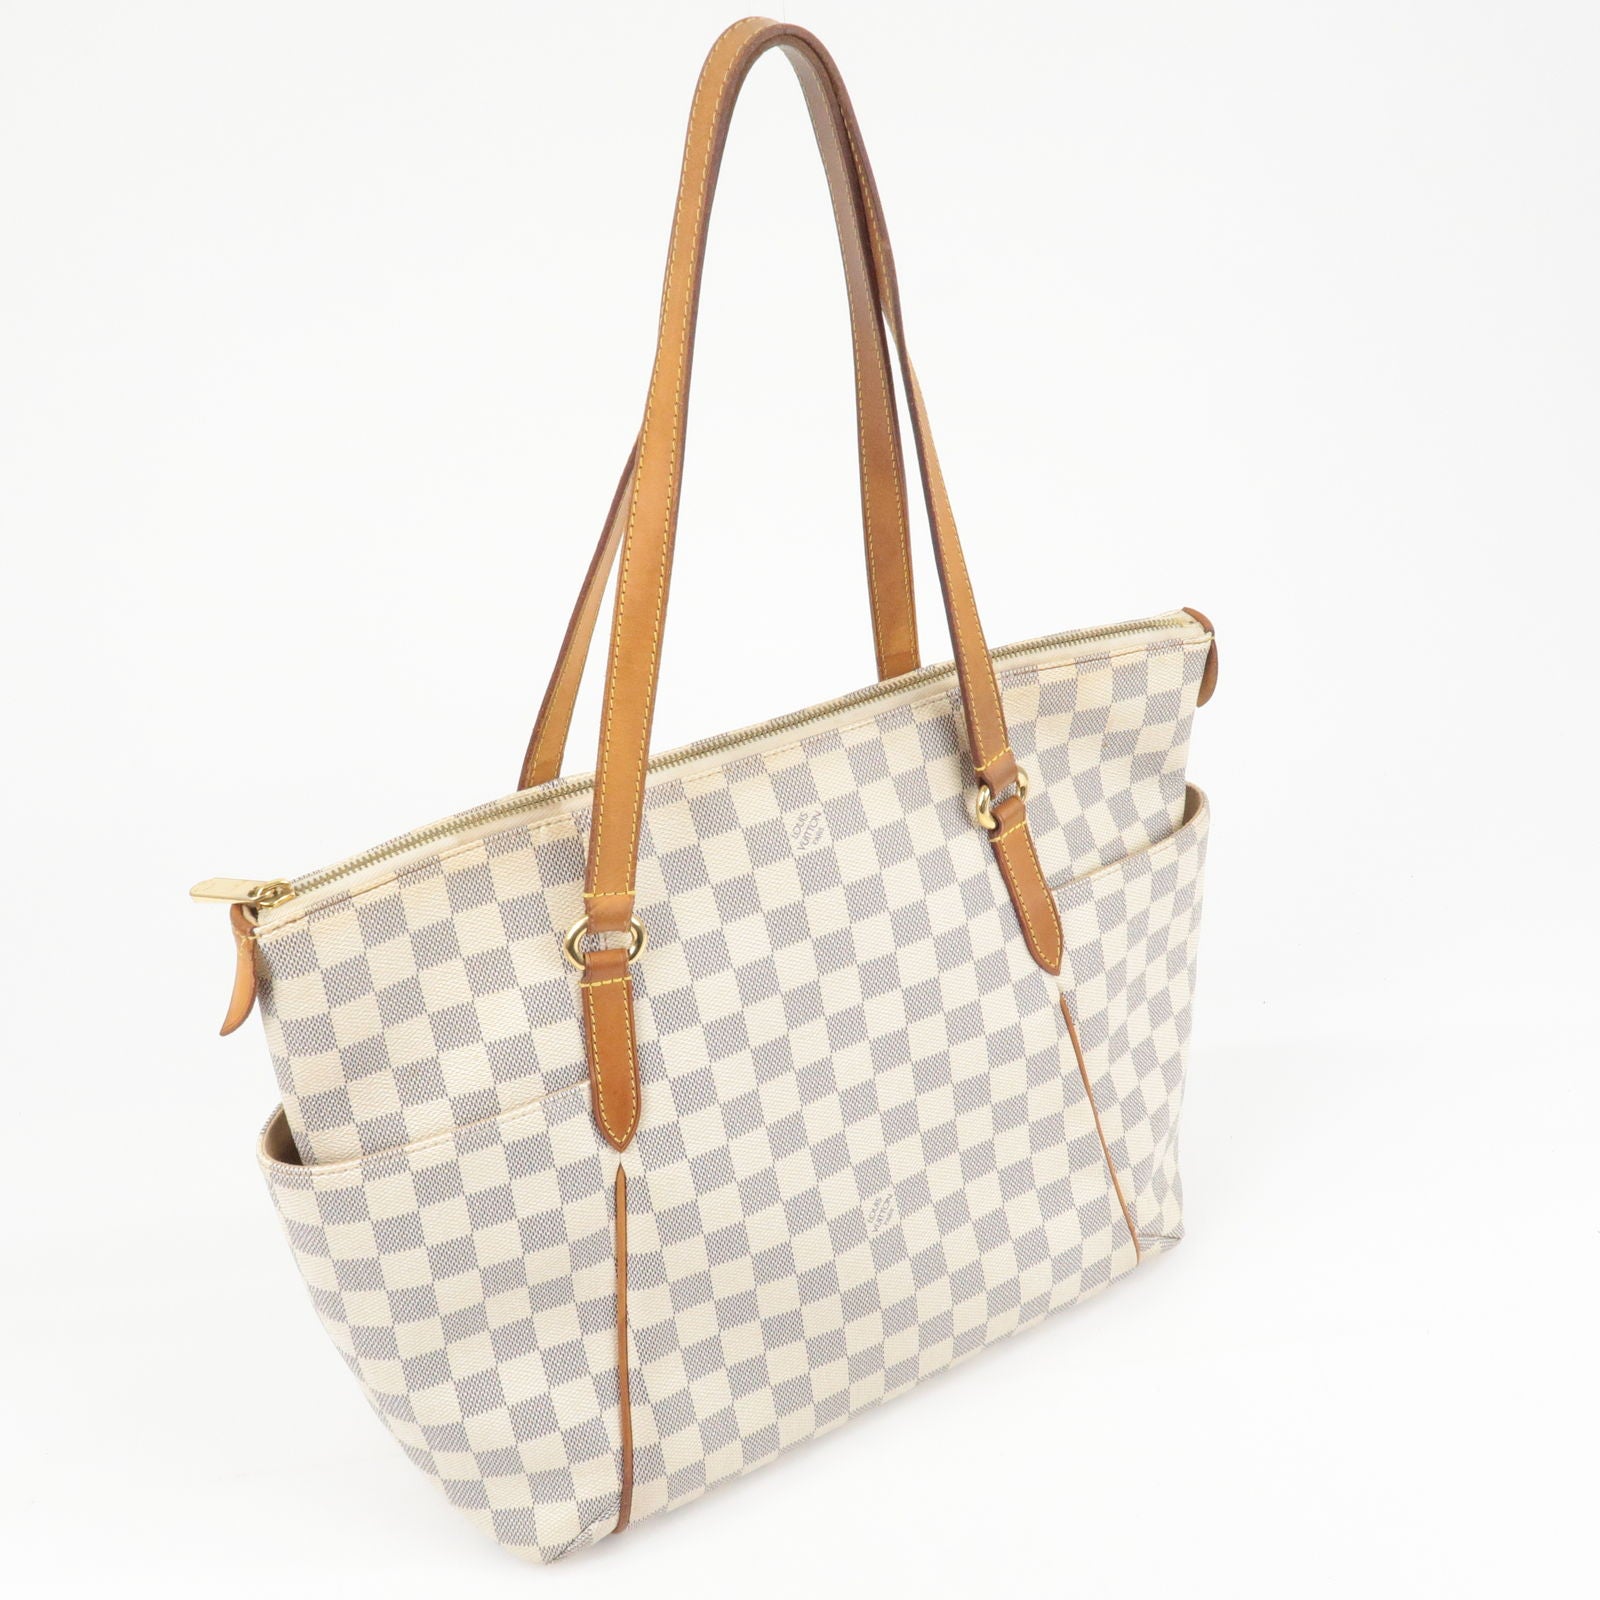 LOUIS VUITTON. Small tote bag in azure checkerboard canv…